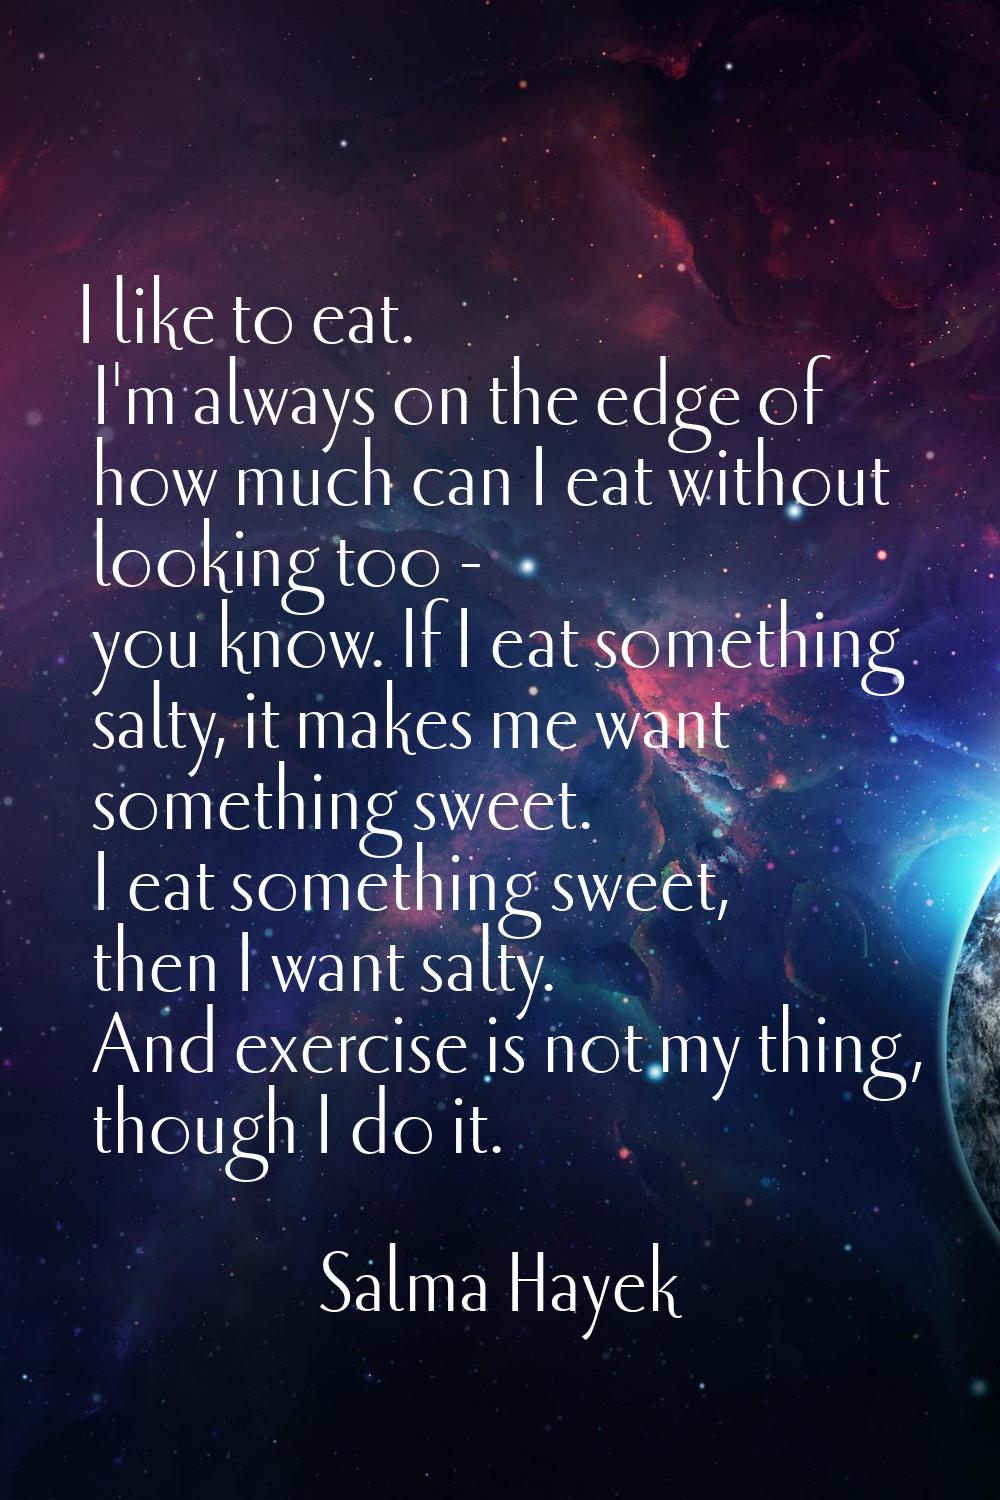 I like to eat. I'm always on the edge of how much can I eat without looking too - you know. If I ea